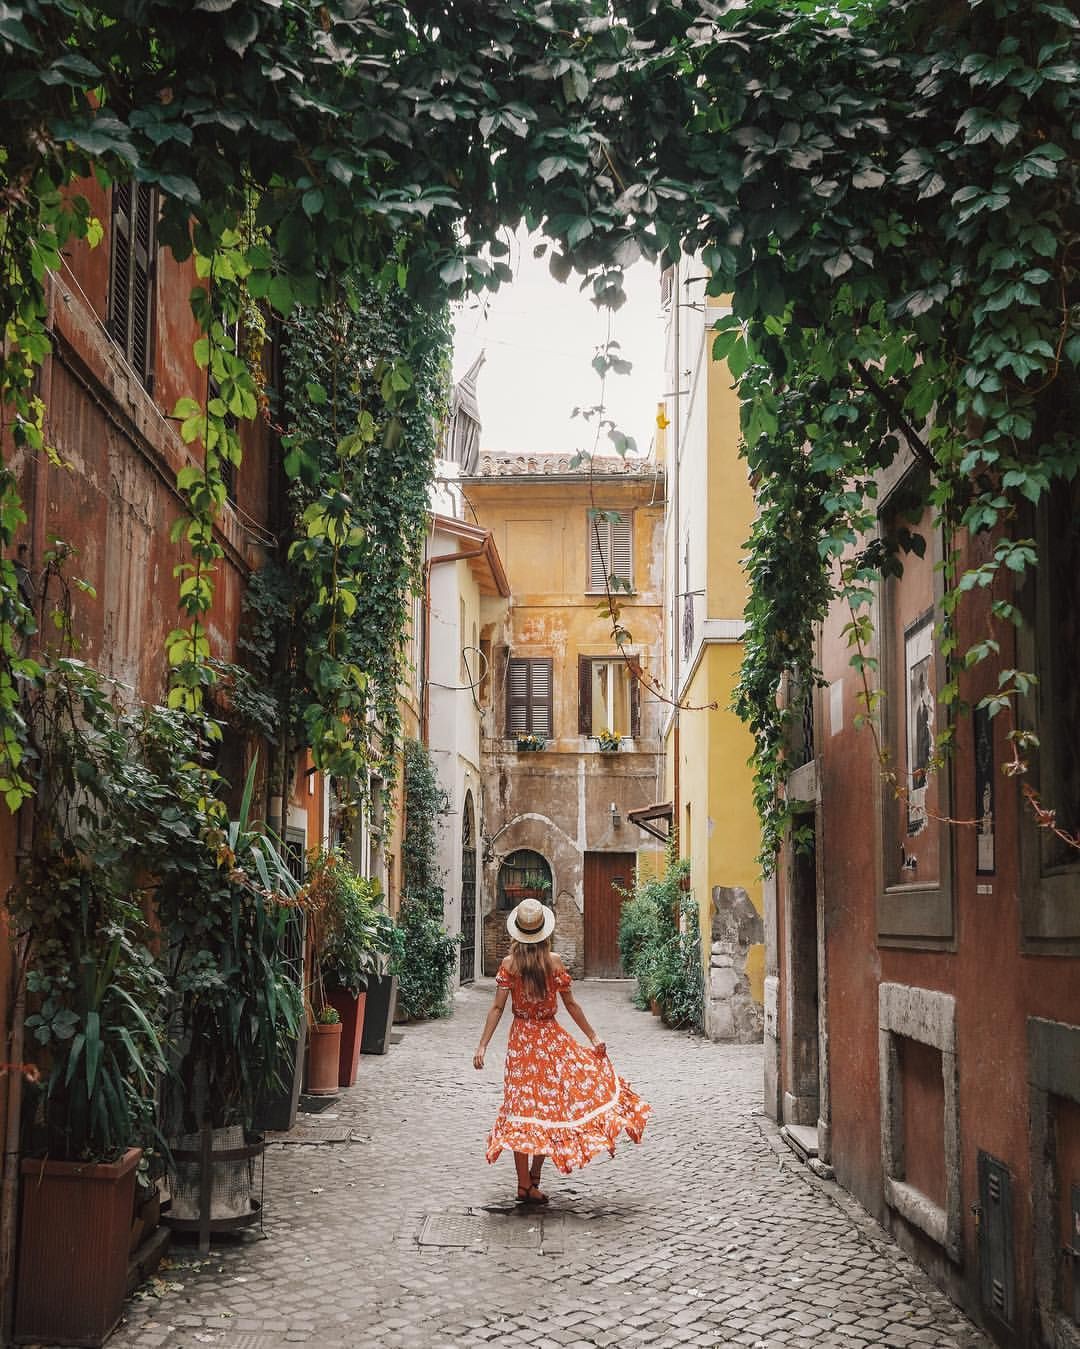 Great outfit ideas for 2019 italy instagram, Hotel Bed Roma: Travel Outfits  